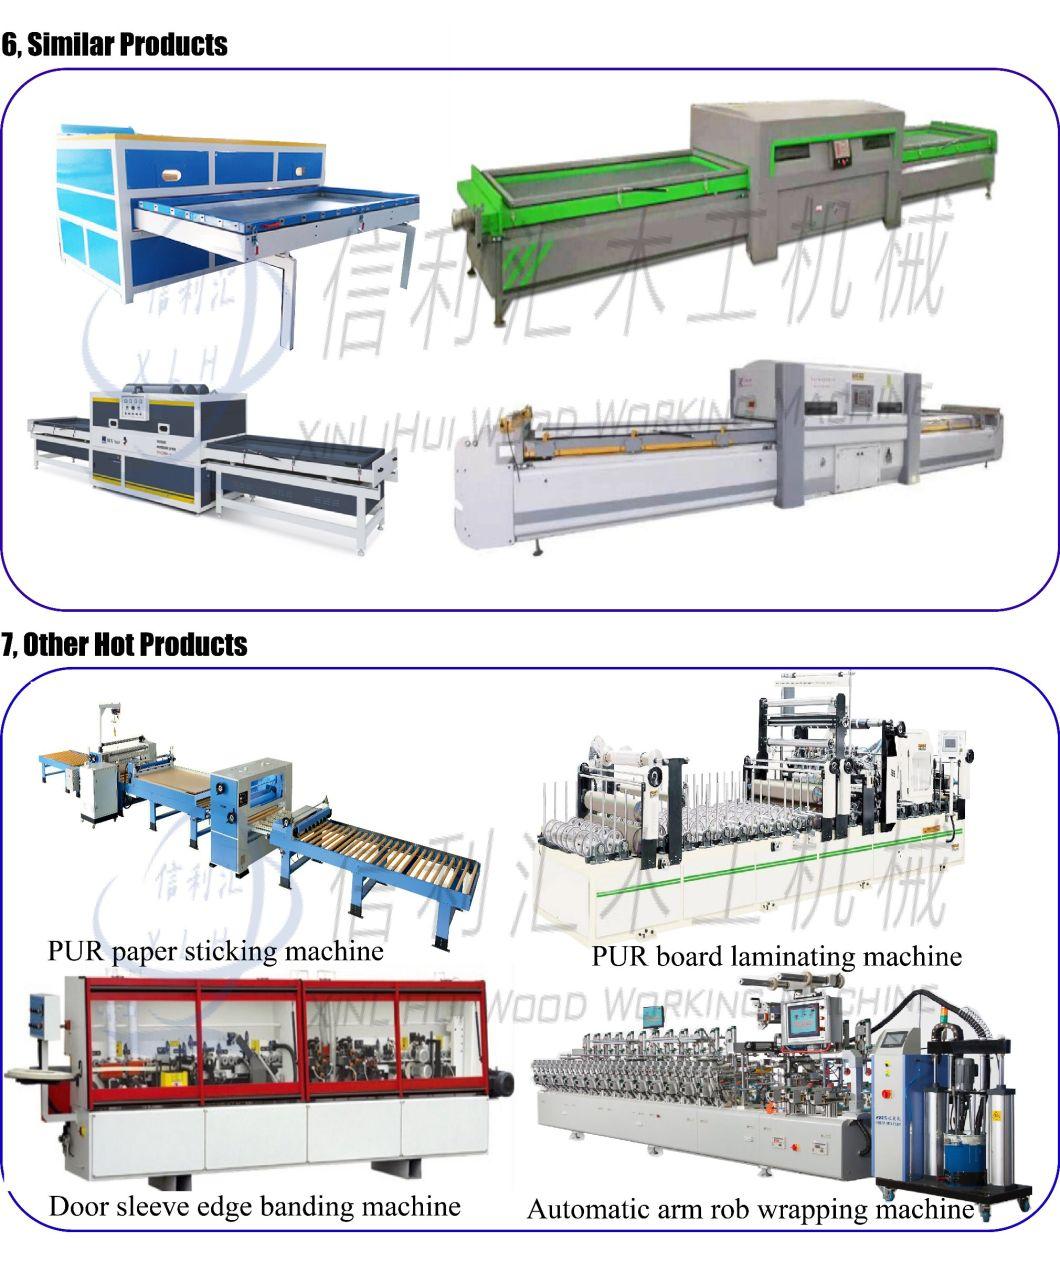 Vacuum Pressing Machine for PVC Screen High Gloss, Profiles Door Panels with Engraved Designs and Engraved Shutters for Wardrobes, Kitchens Frame